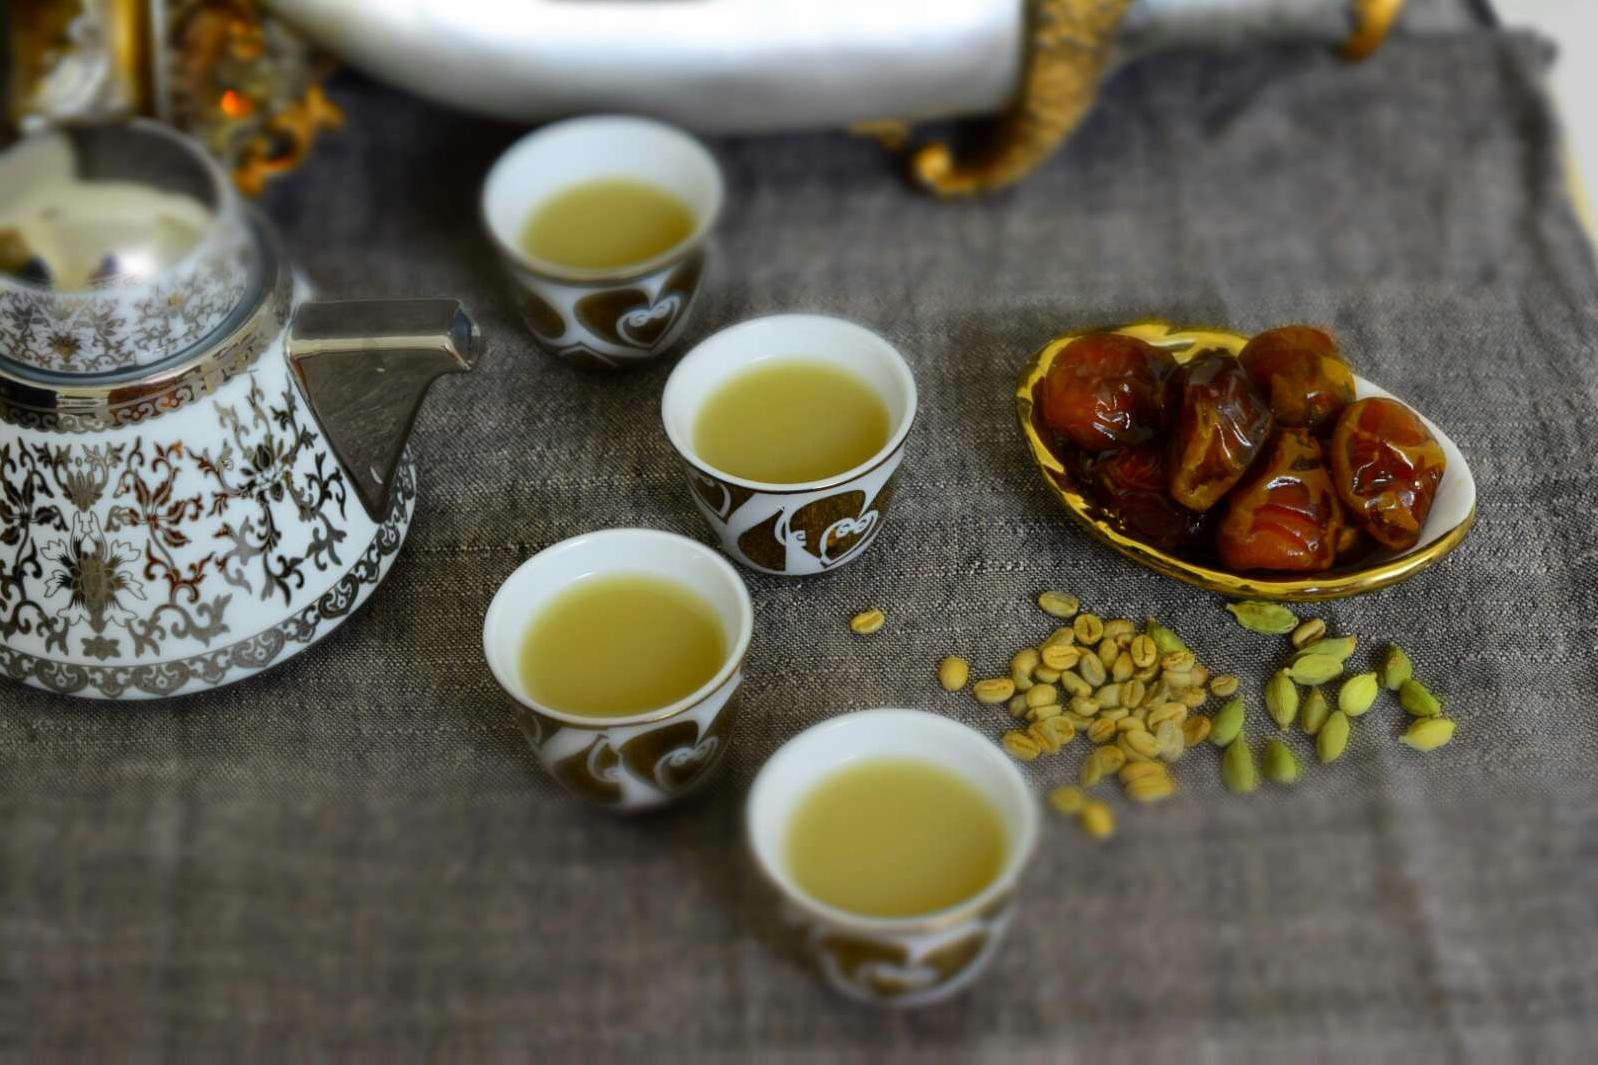  Qahwa - the perfect brew for a cozy afternoon gathering.